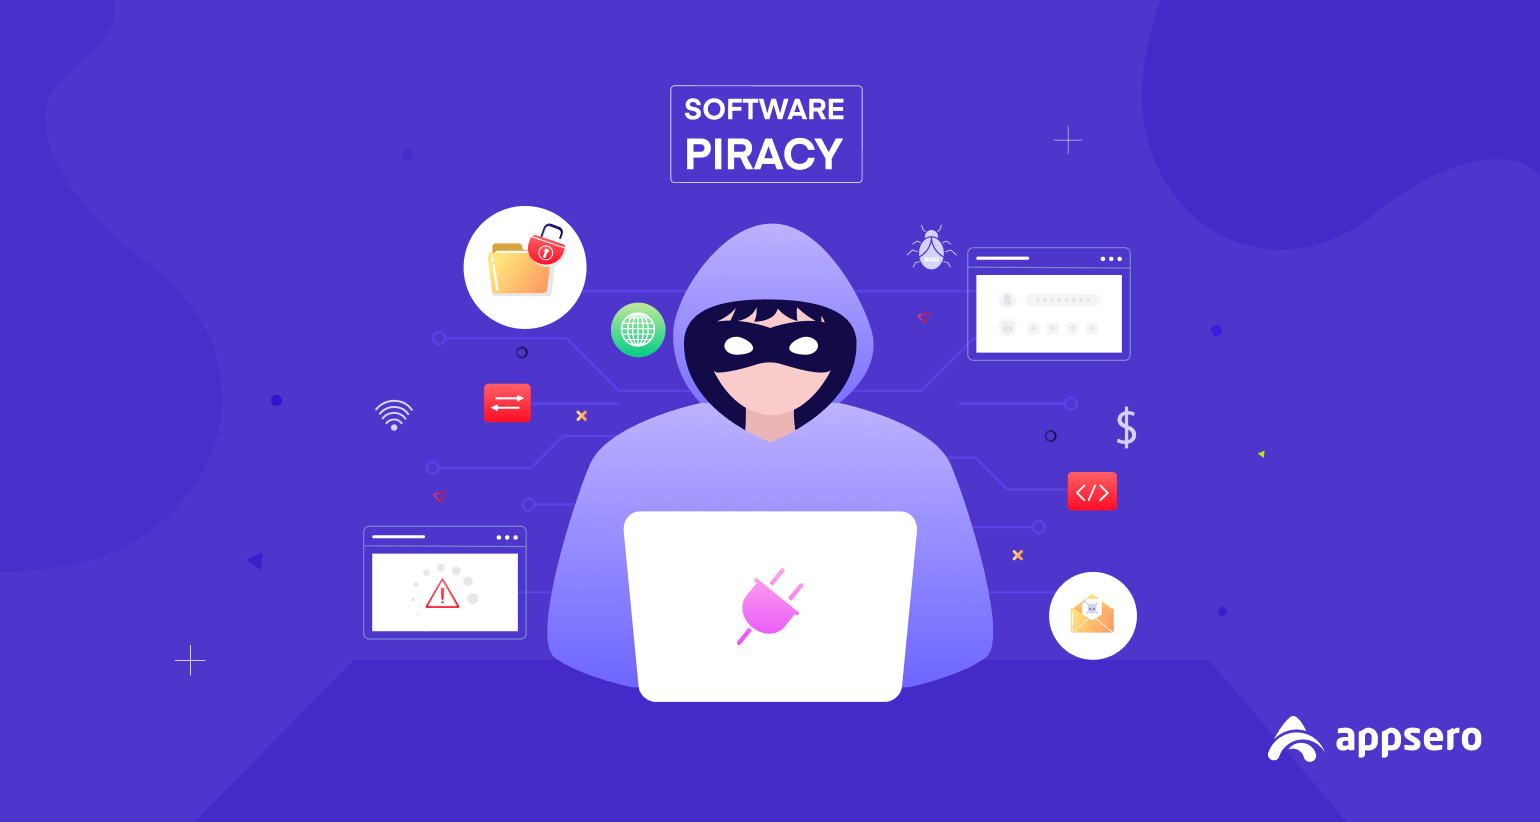 Software Piracy: How Appsero Can Help You Prevent it